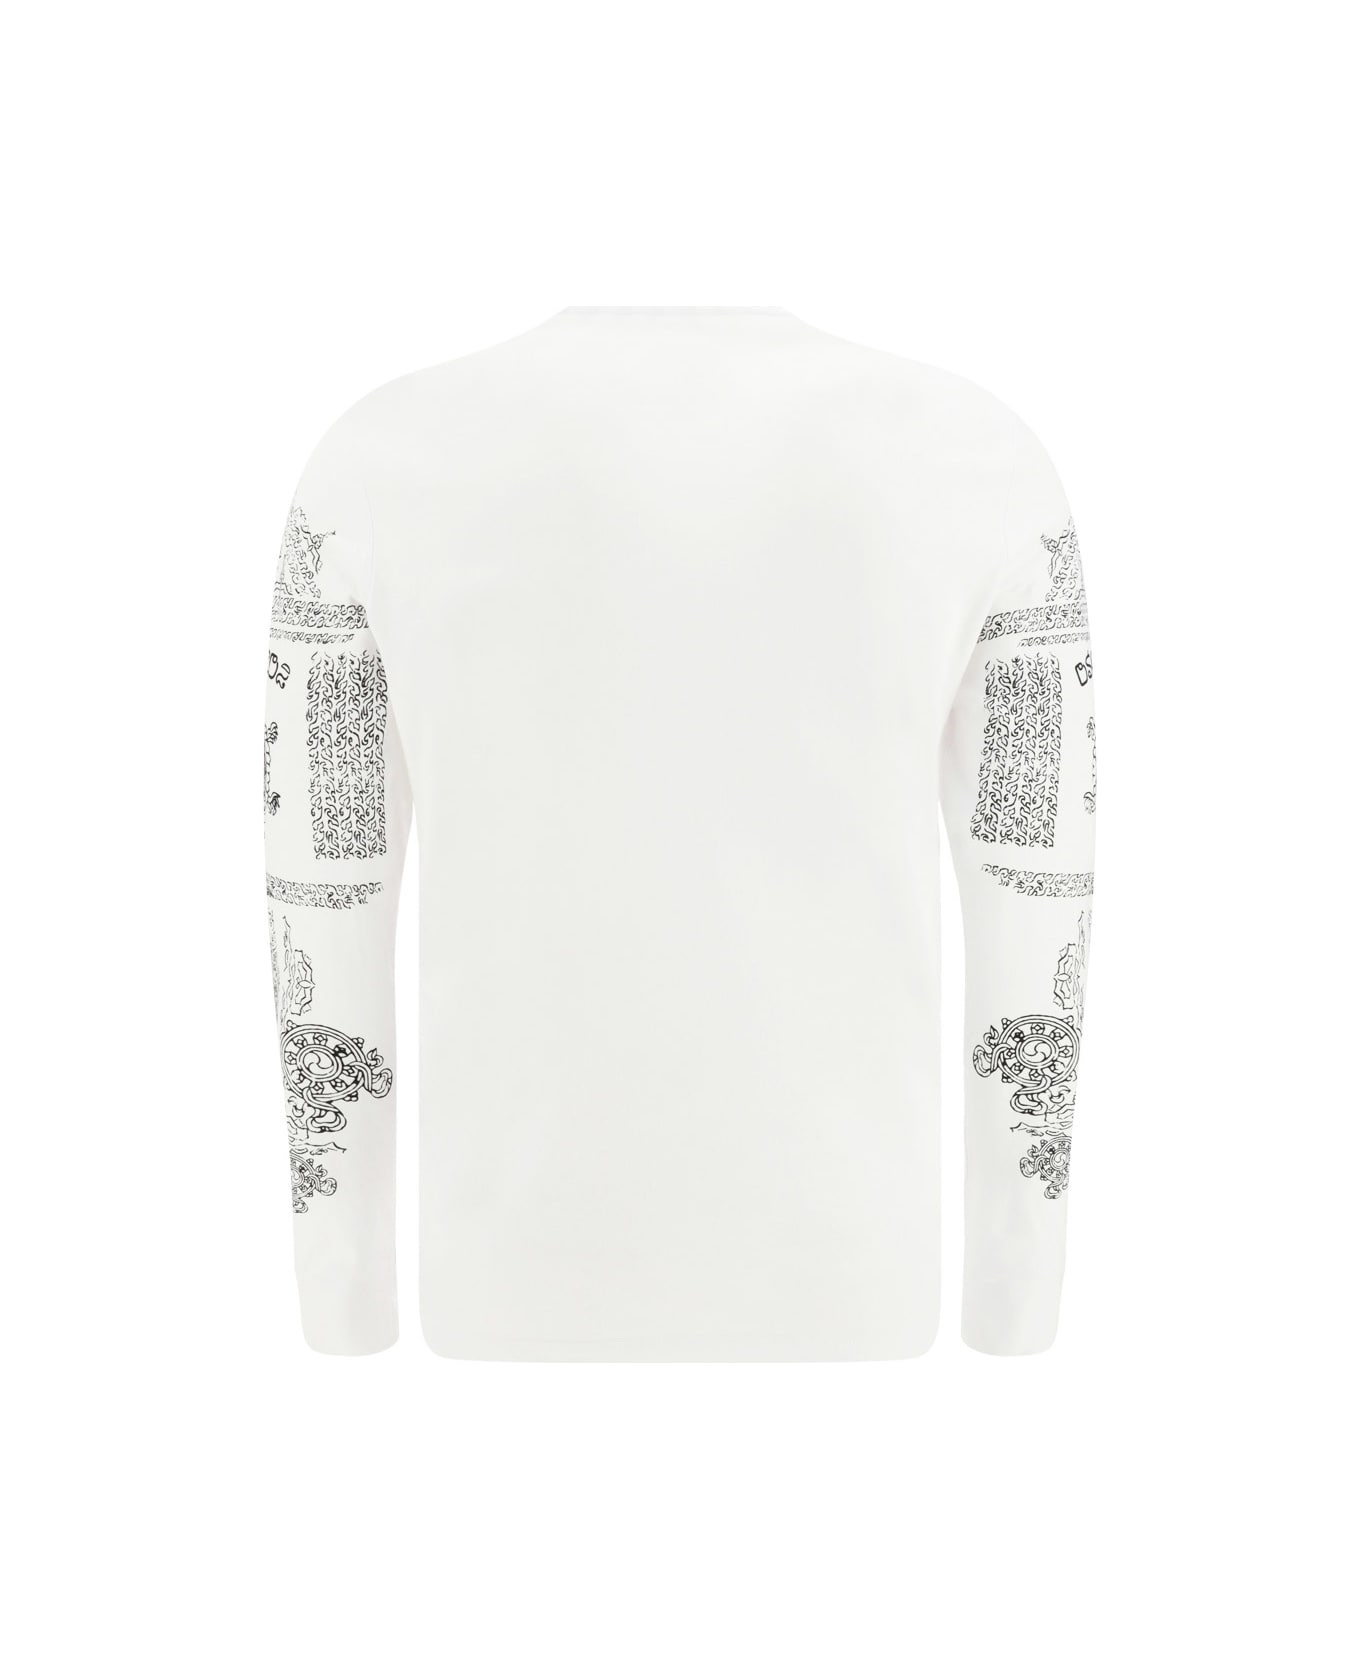 Dsquared2 Long Sleeve Jersey - 100